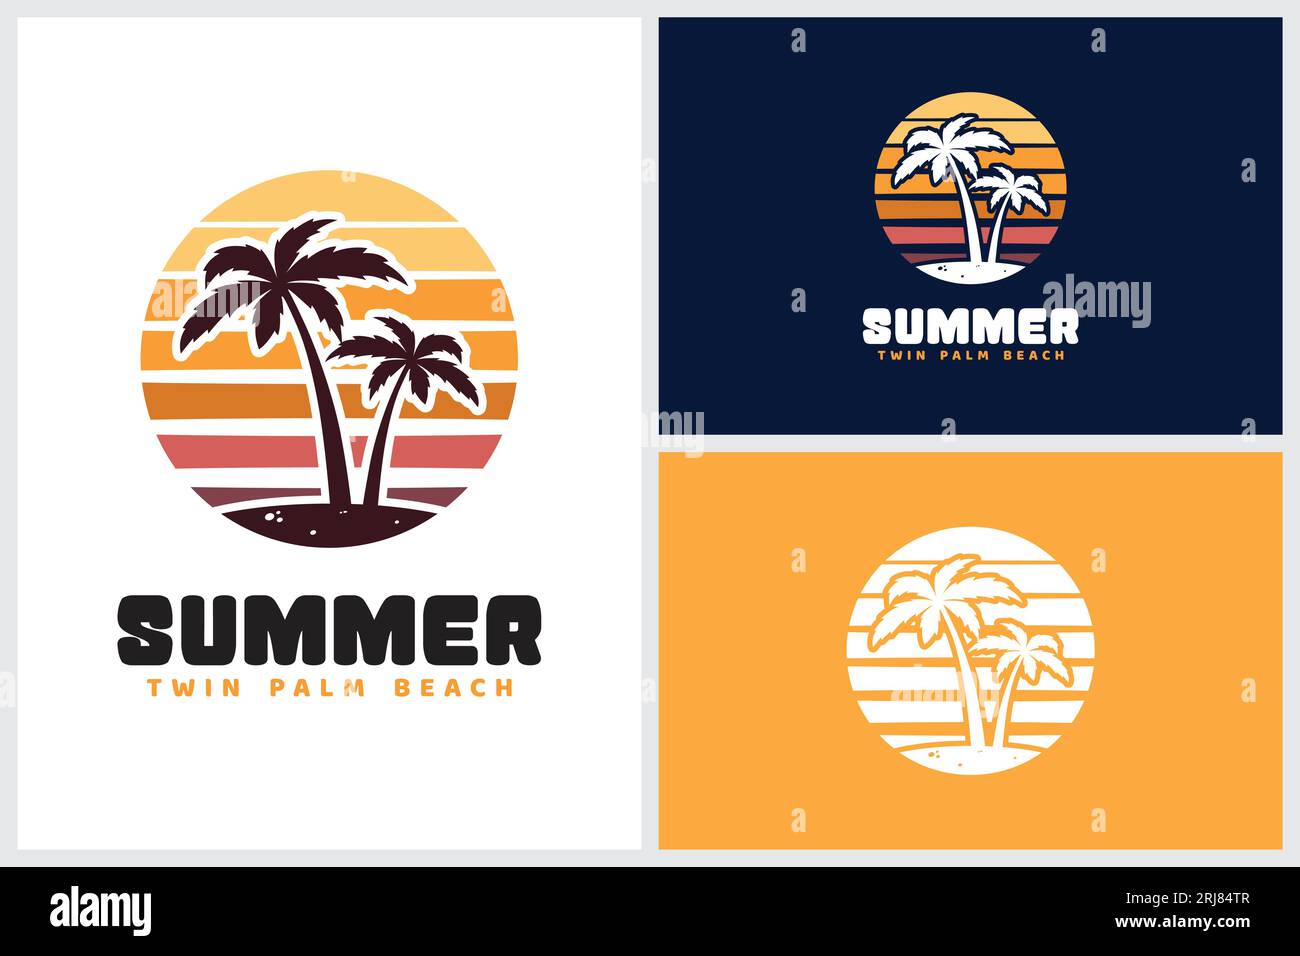 Sunset Beach mit Twin Palm for Summer Surf Vacation Logo-Inspiration Stock Vektor